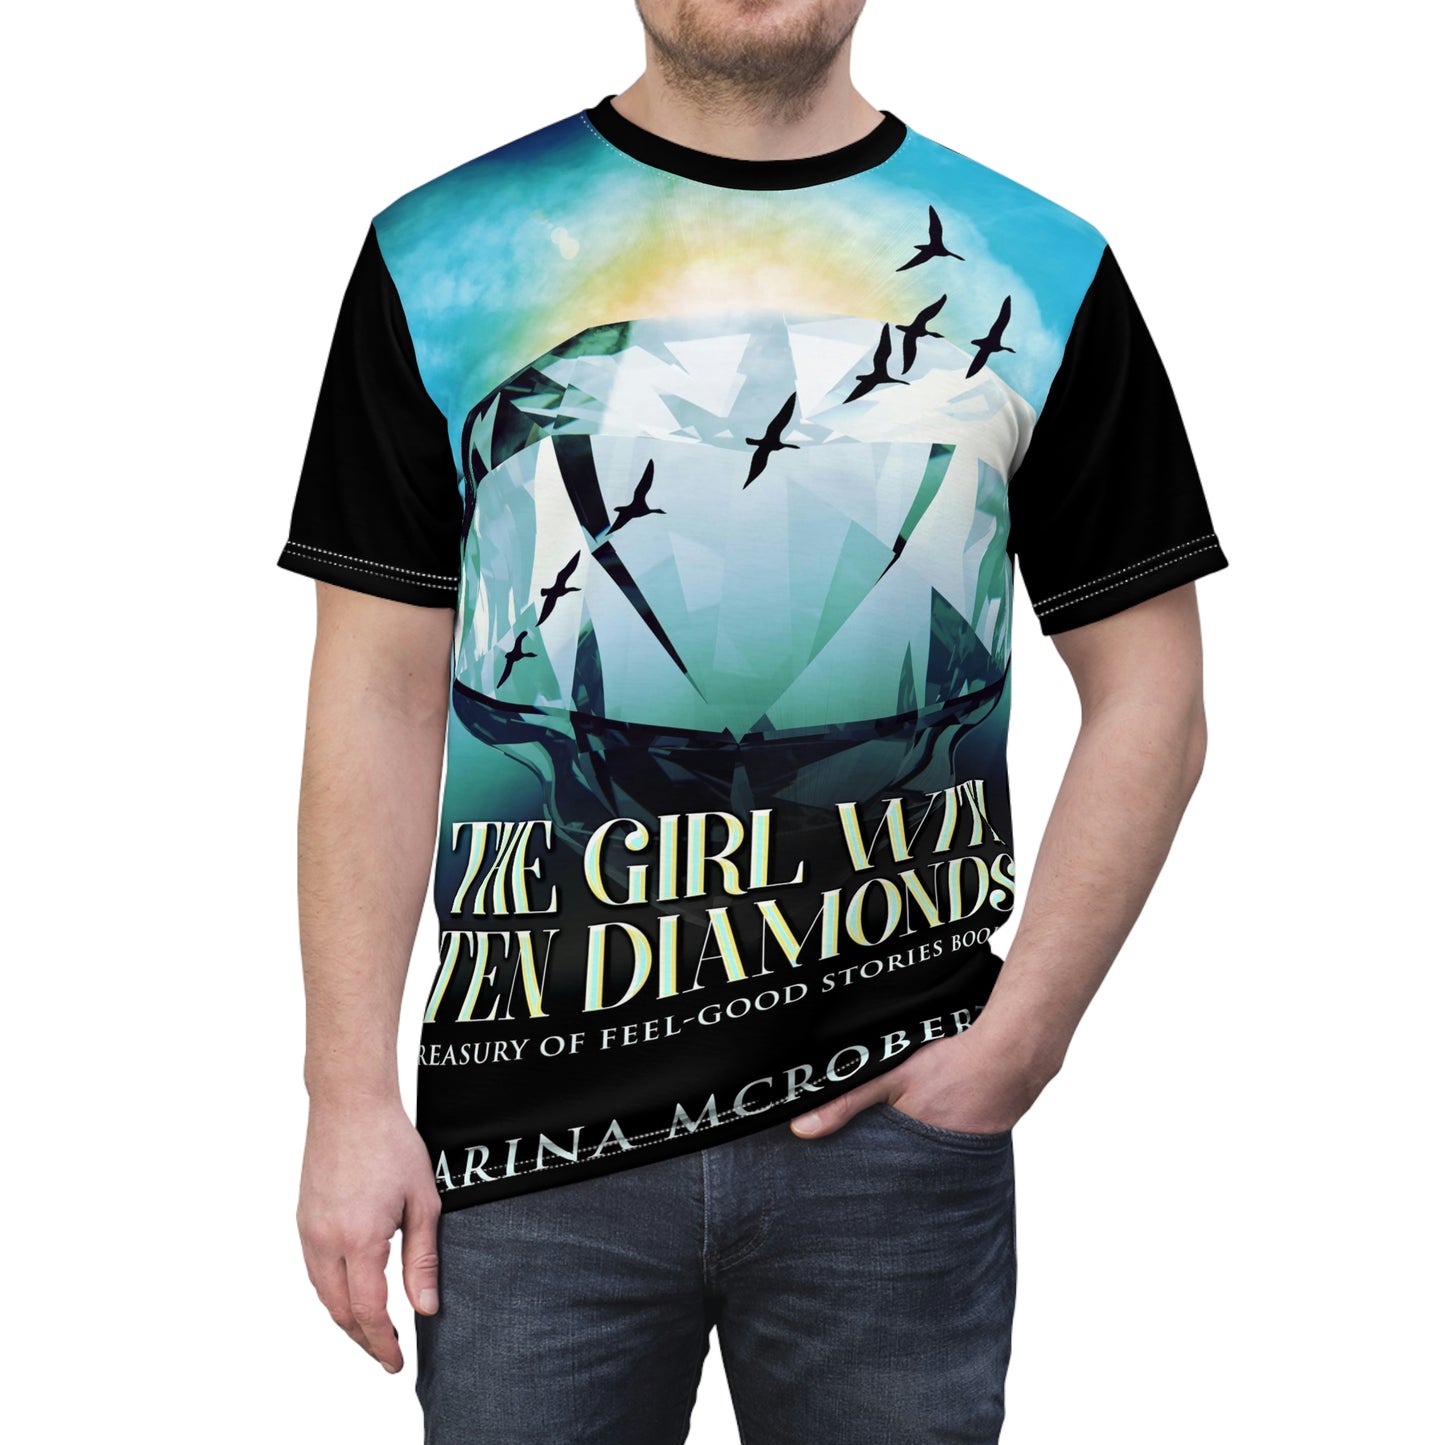 The Girl With Ten Diamonds - Unisex All-Over Print Cut & Sew T-Shirt